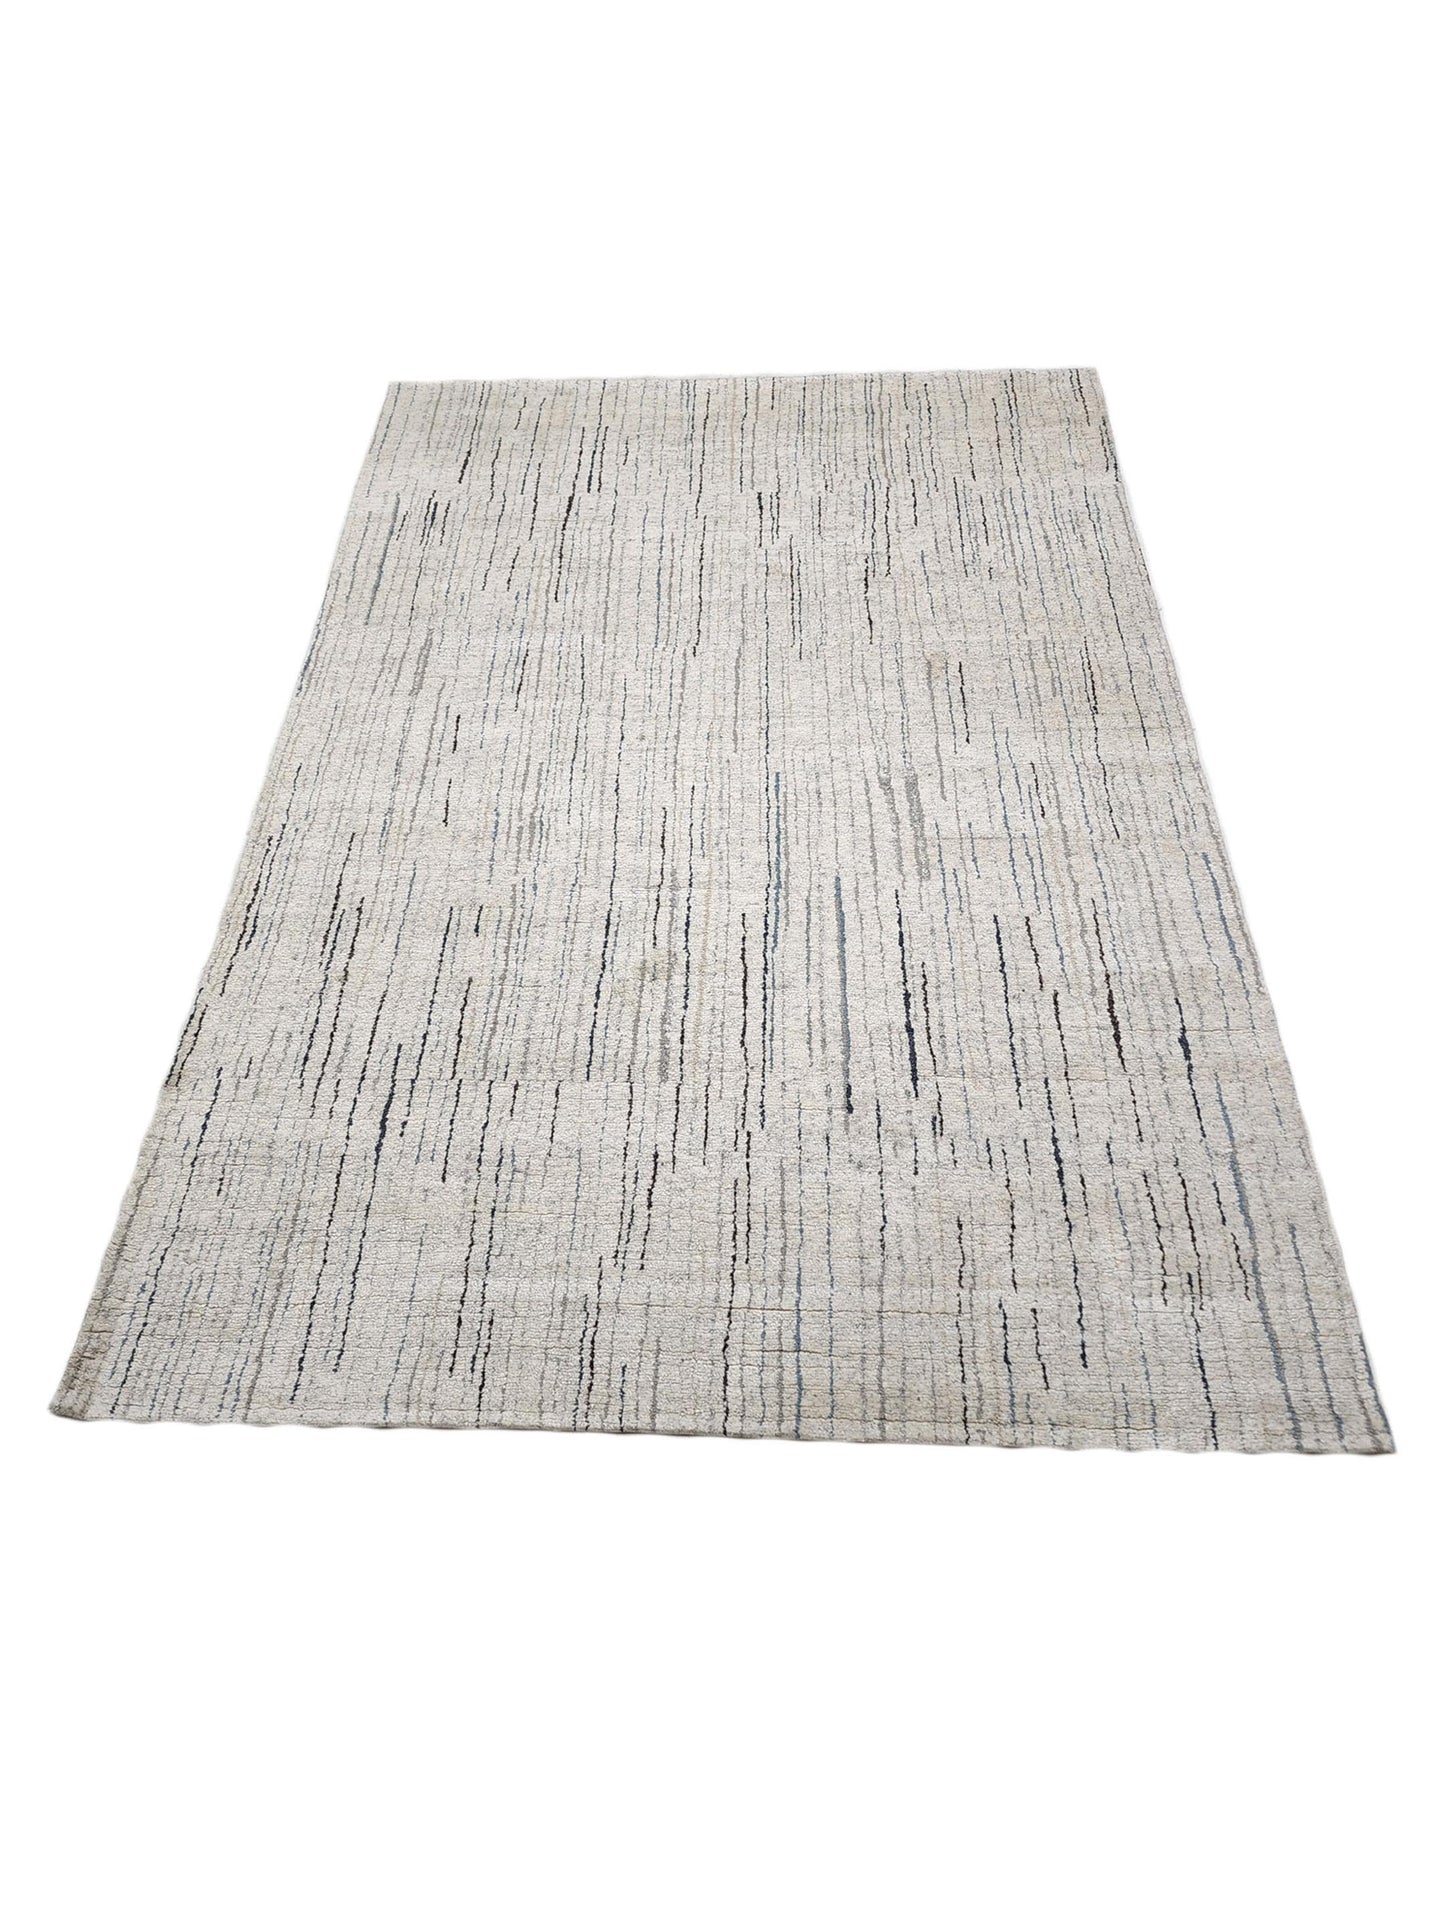 Artisan Marion  Ivory Multi Transitional Knotted Rug